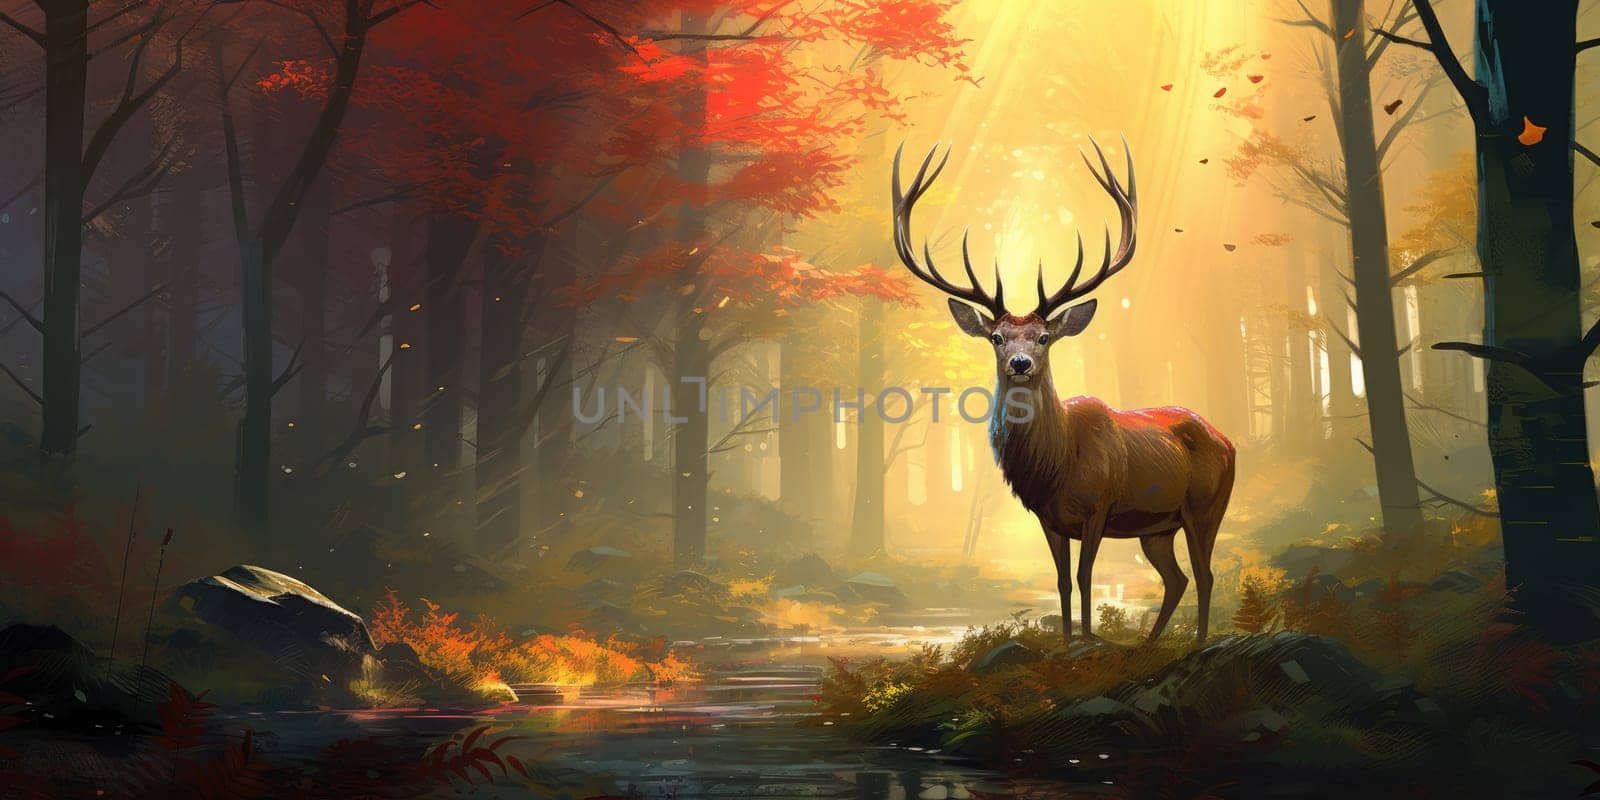 Deer in the nature, hoofed grazing or browsing animal, with branched bony antlers that are shed annually and typically borne only by the male